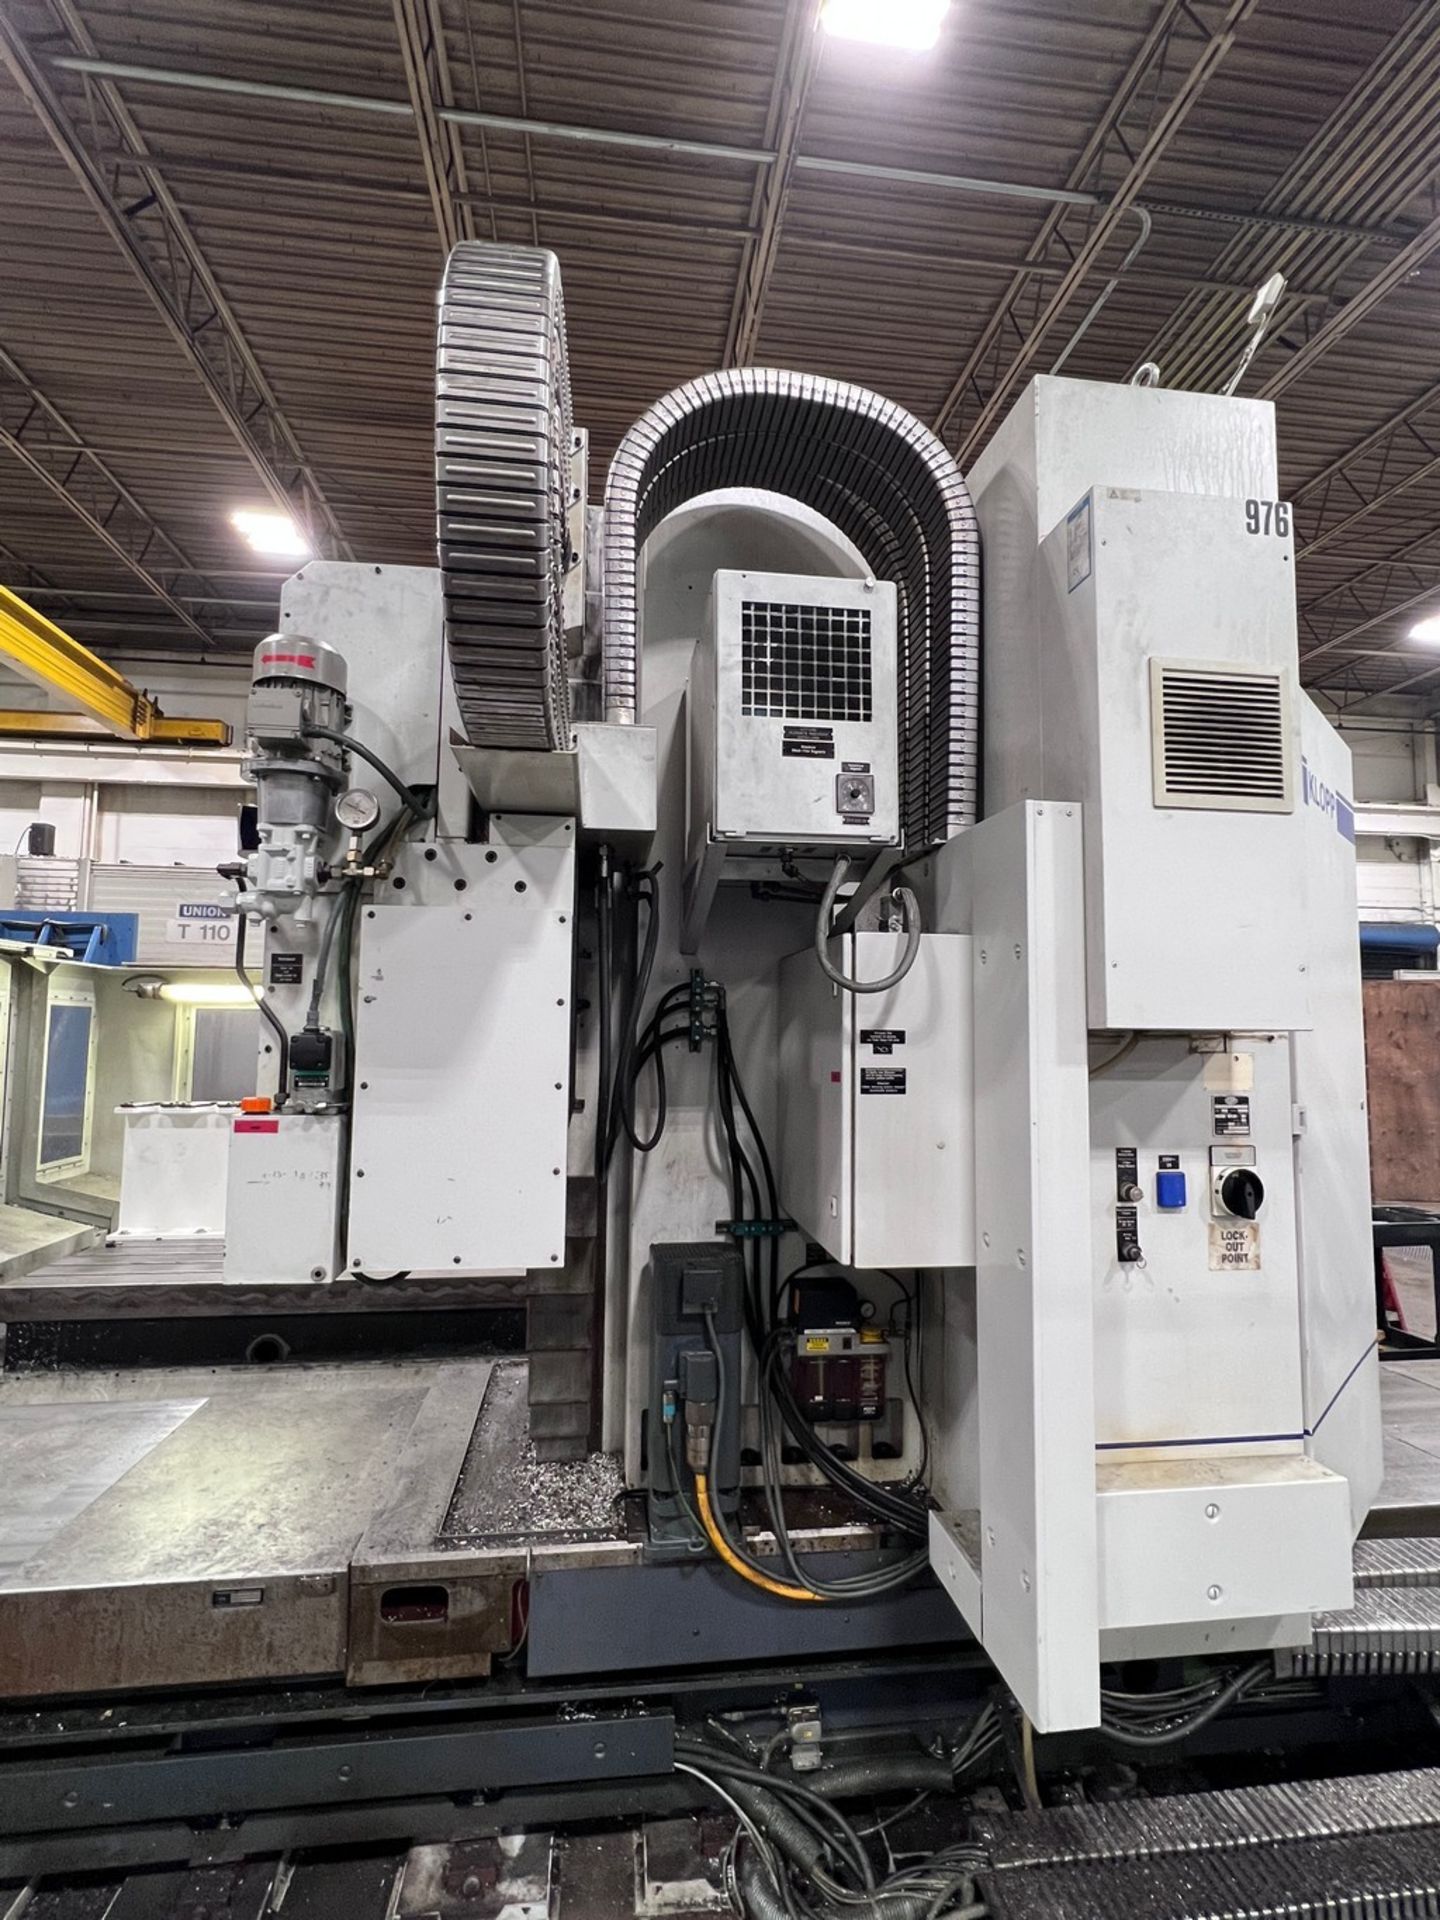 2007 Klopp UFS1000 CNC 5-Axis Travelling Column Milling Machine - Image 10 of 10